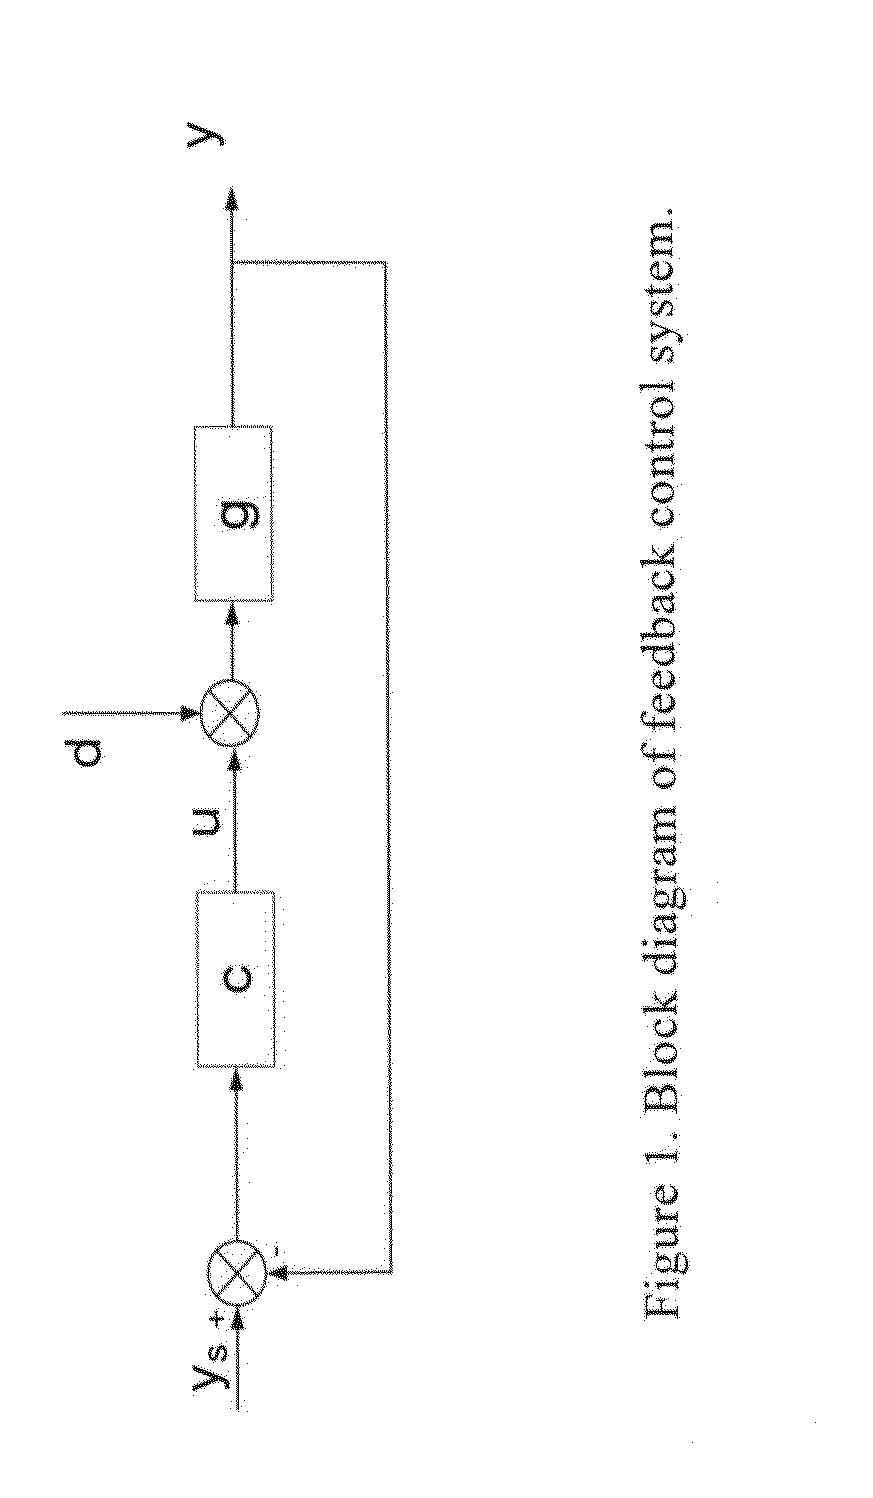 Closed loop PI/PID controller tuning method for stable and integrating process with time delay